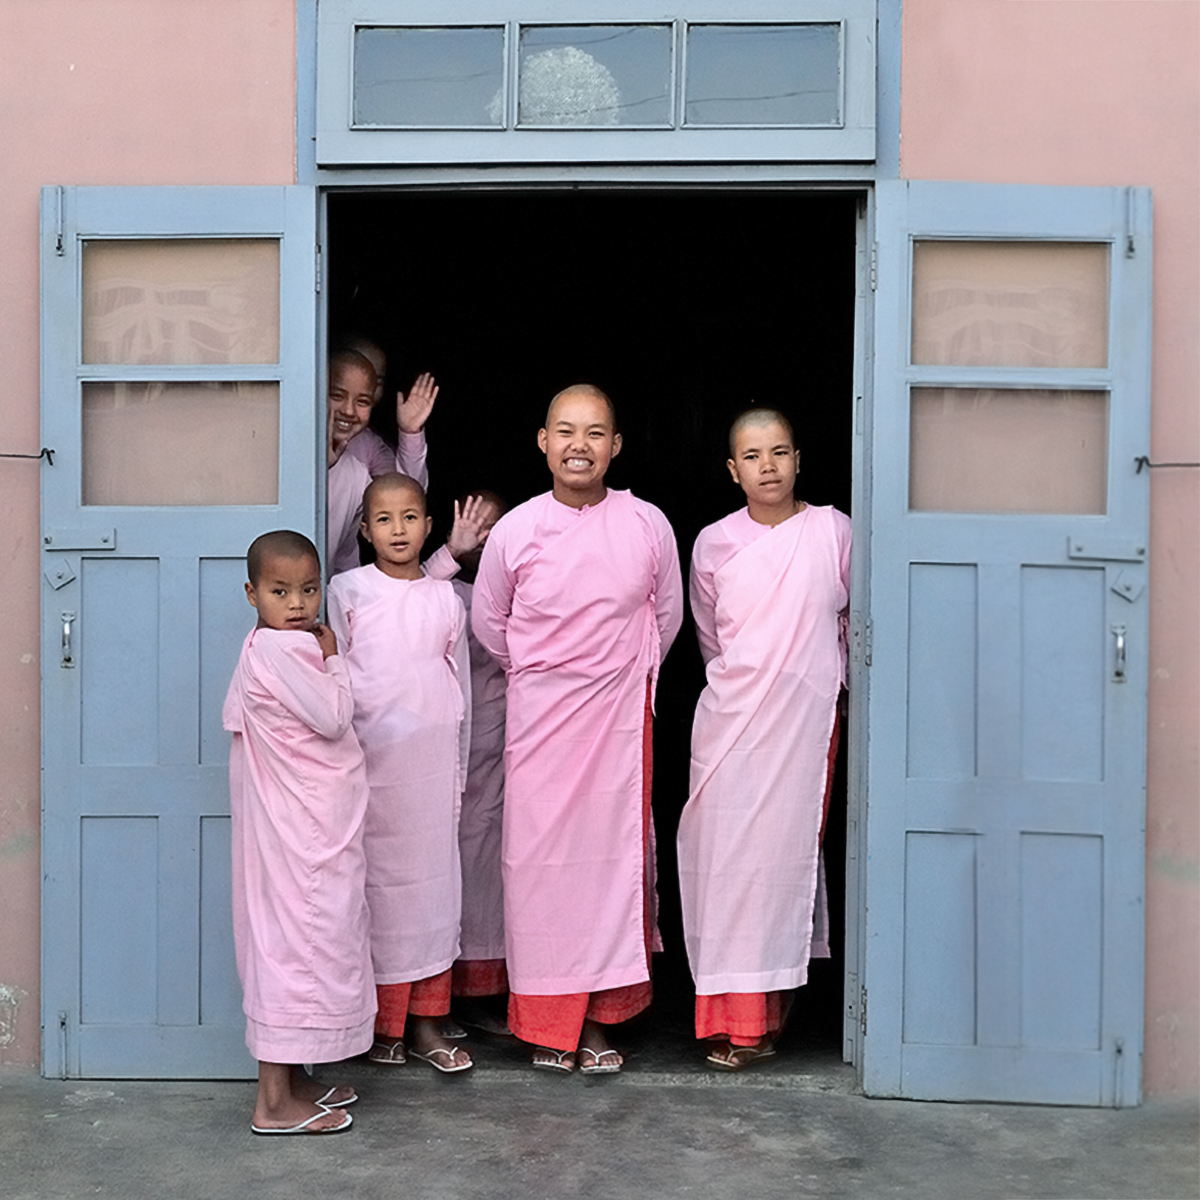 a group of people in pink robes standing in a doorway